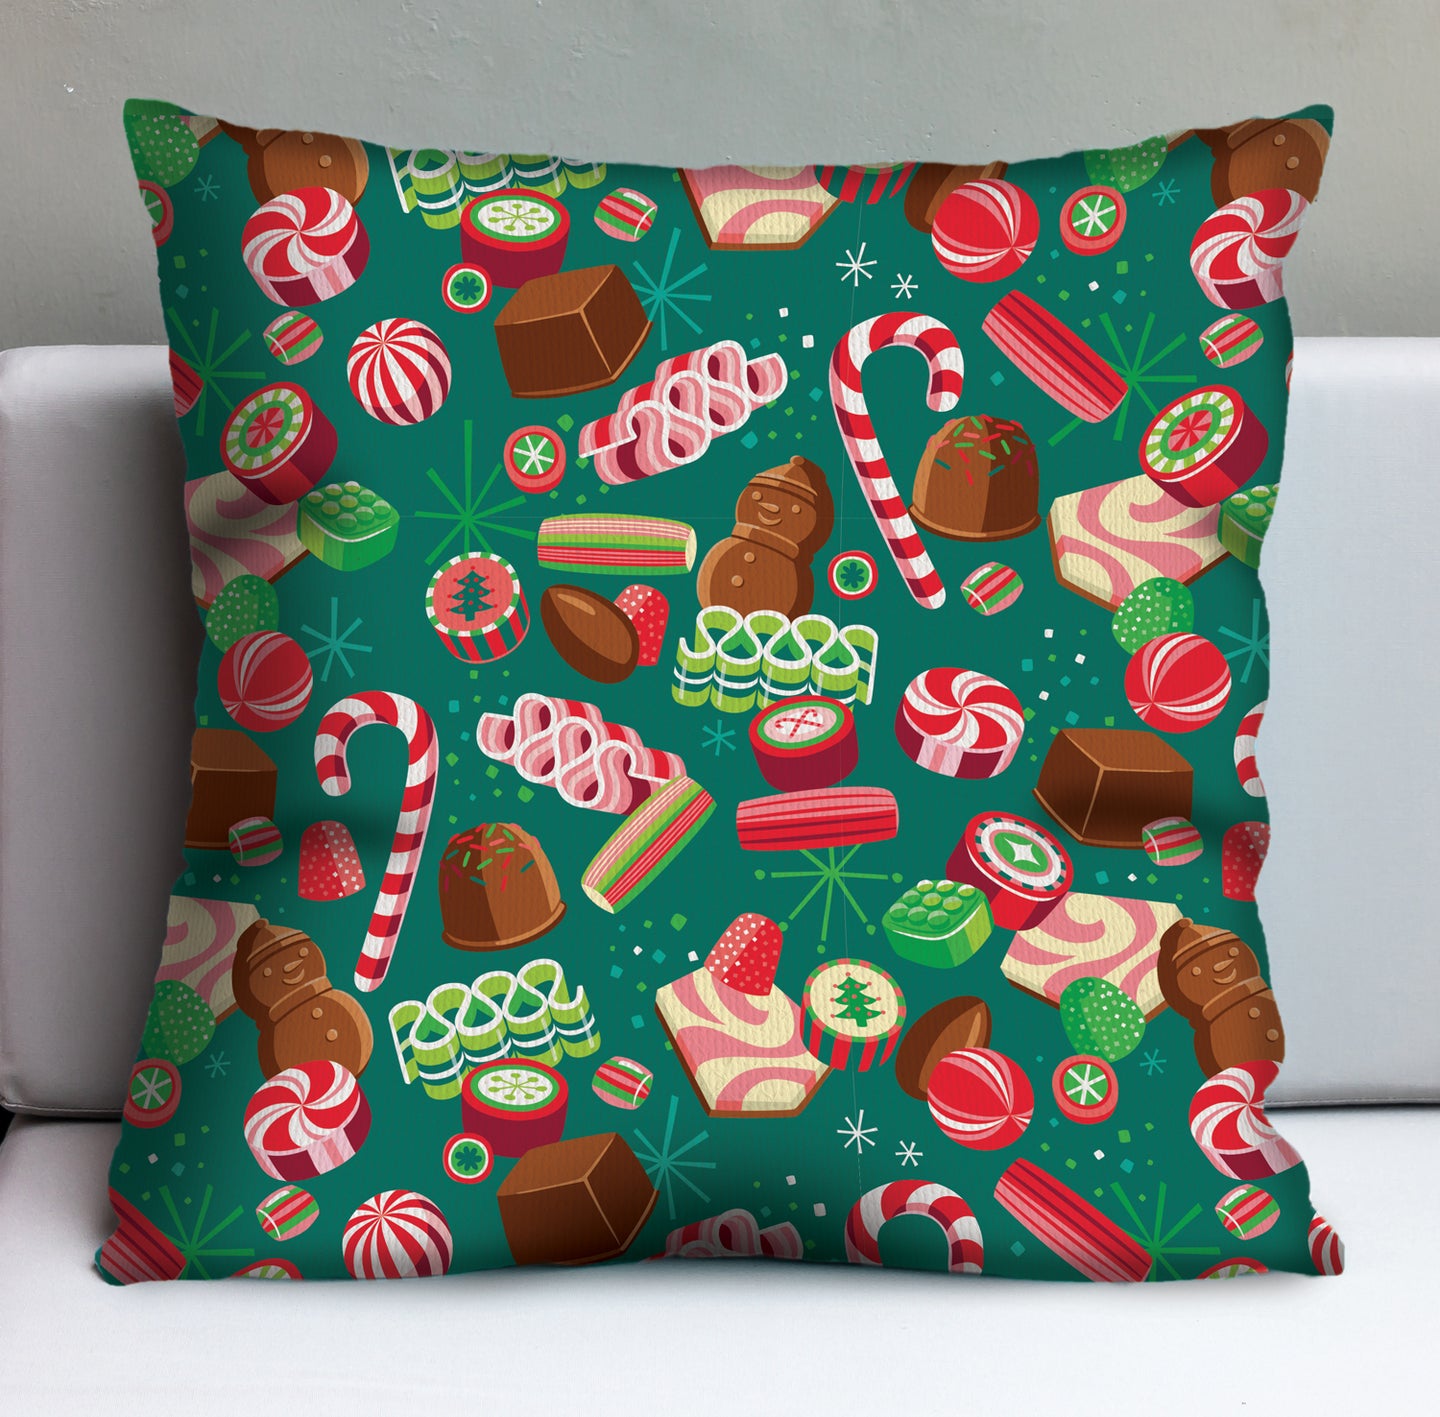 Visions of Sugar Plums Pillow Cover